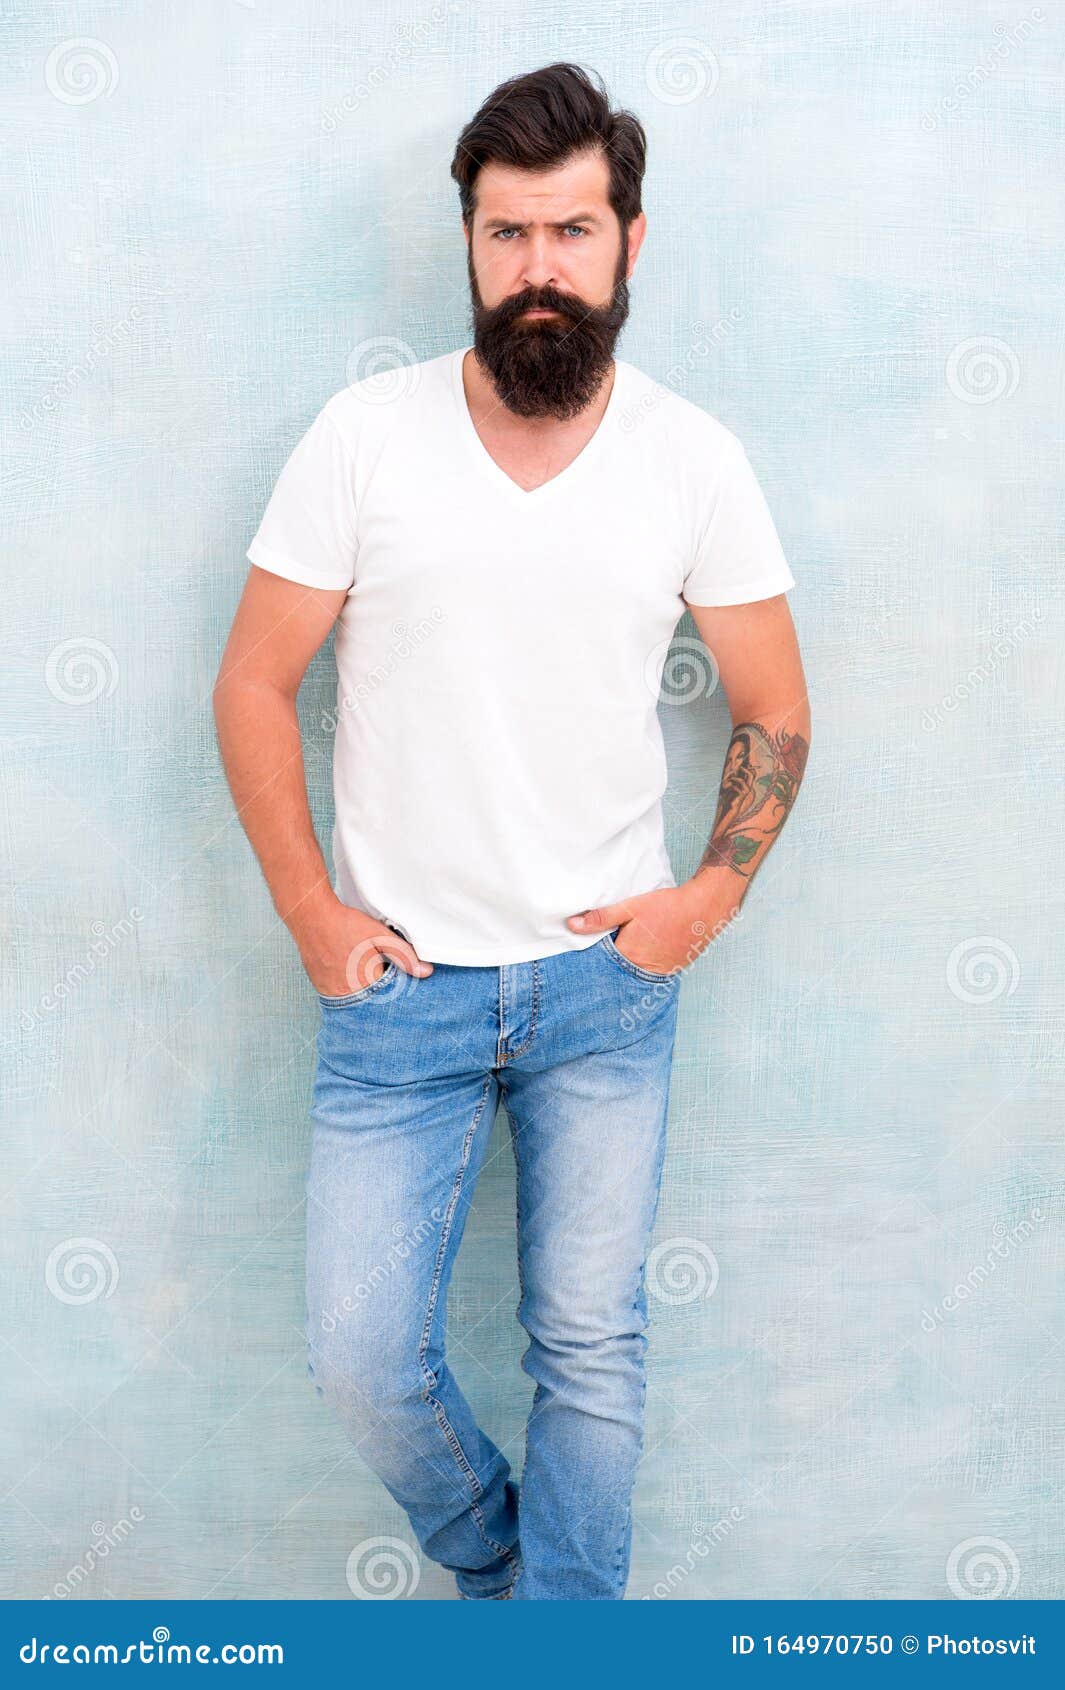 Personal Style. Physical Attractiveness. Handsome Hipster Jeans. Male ...